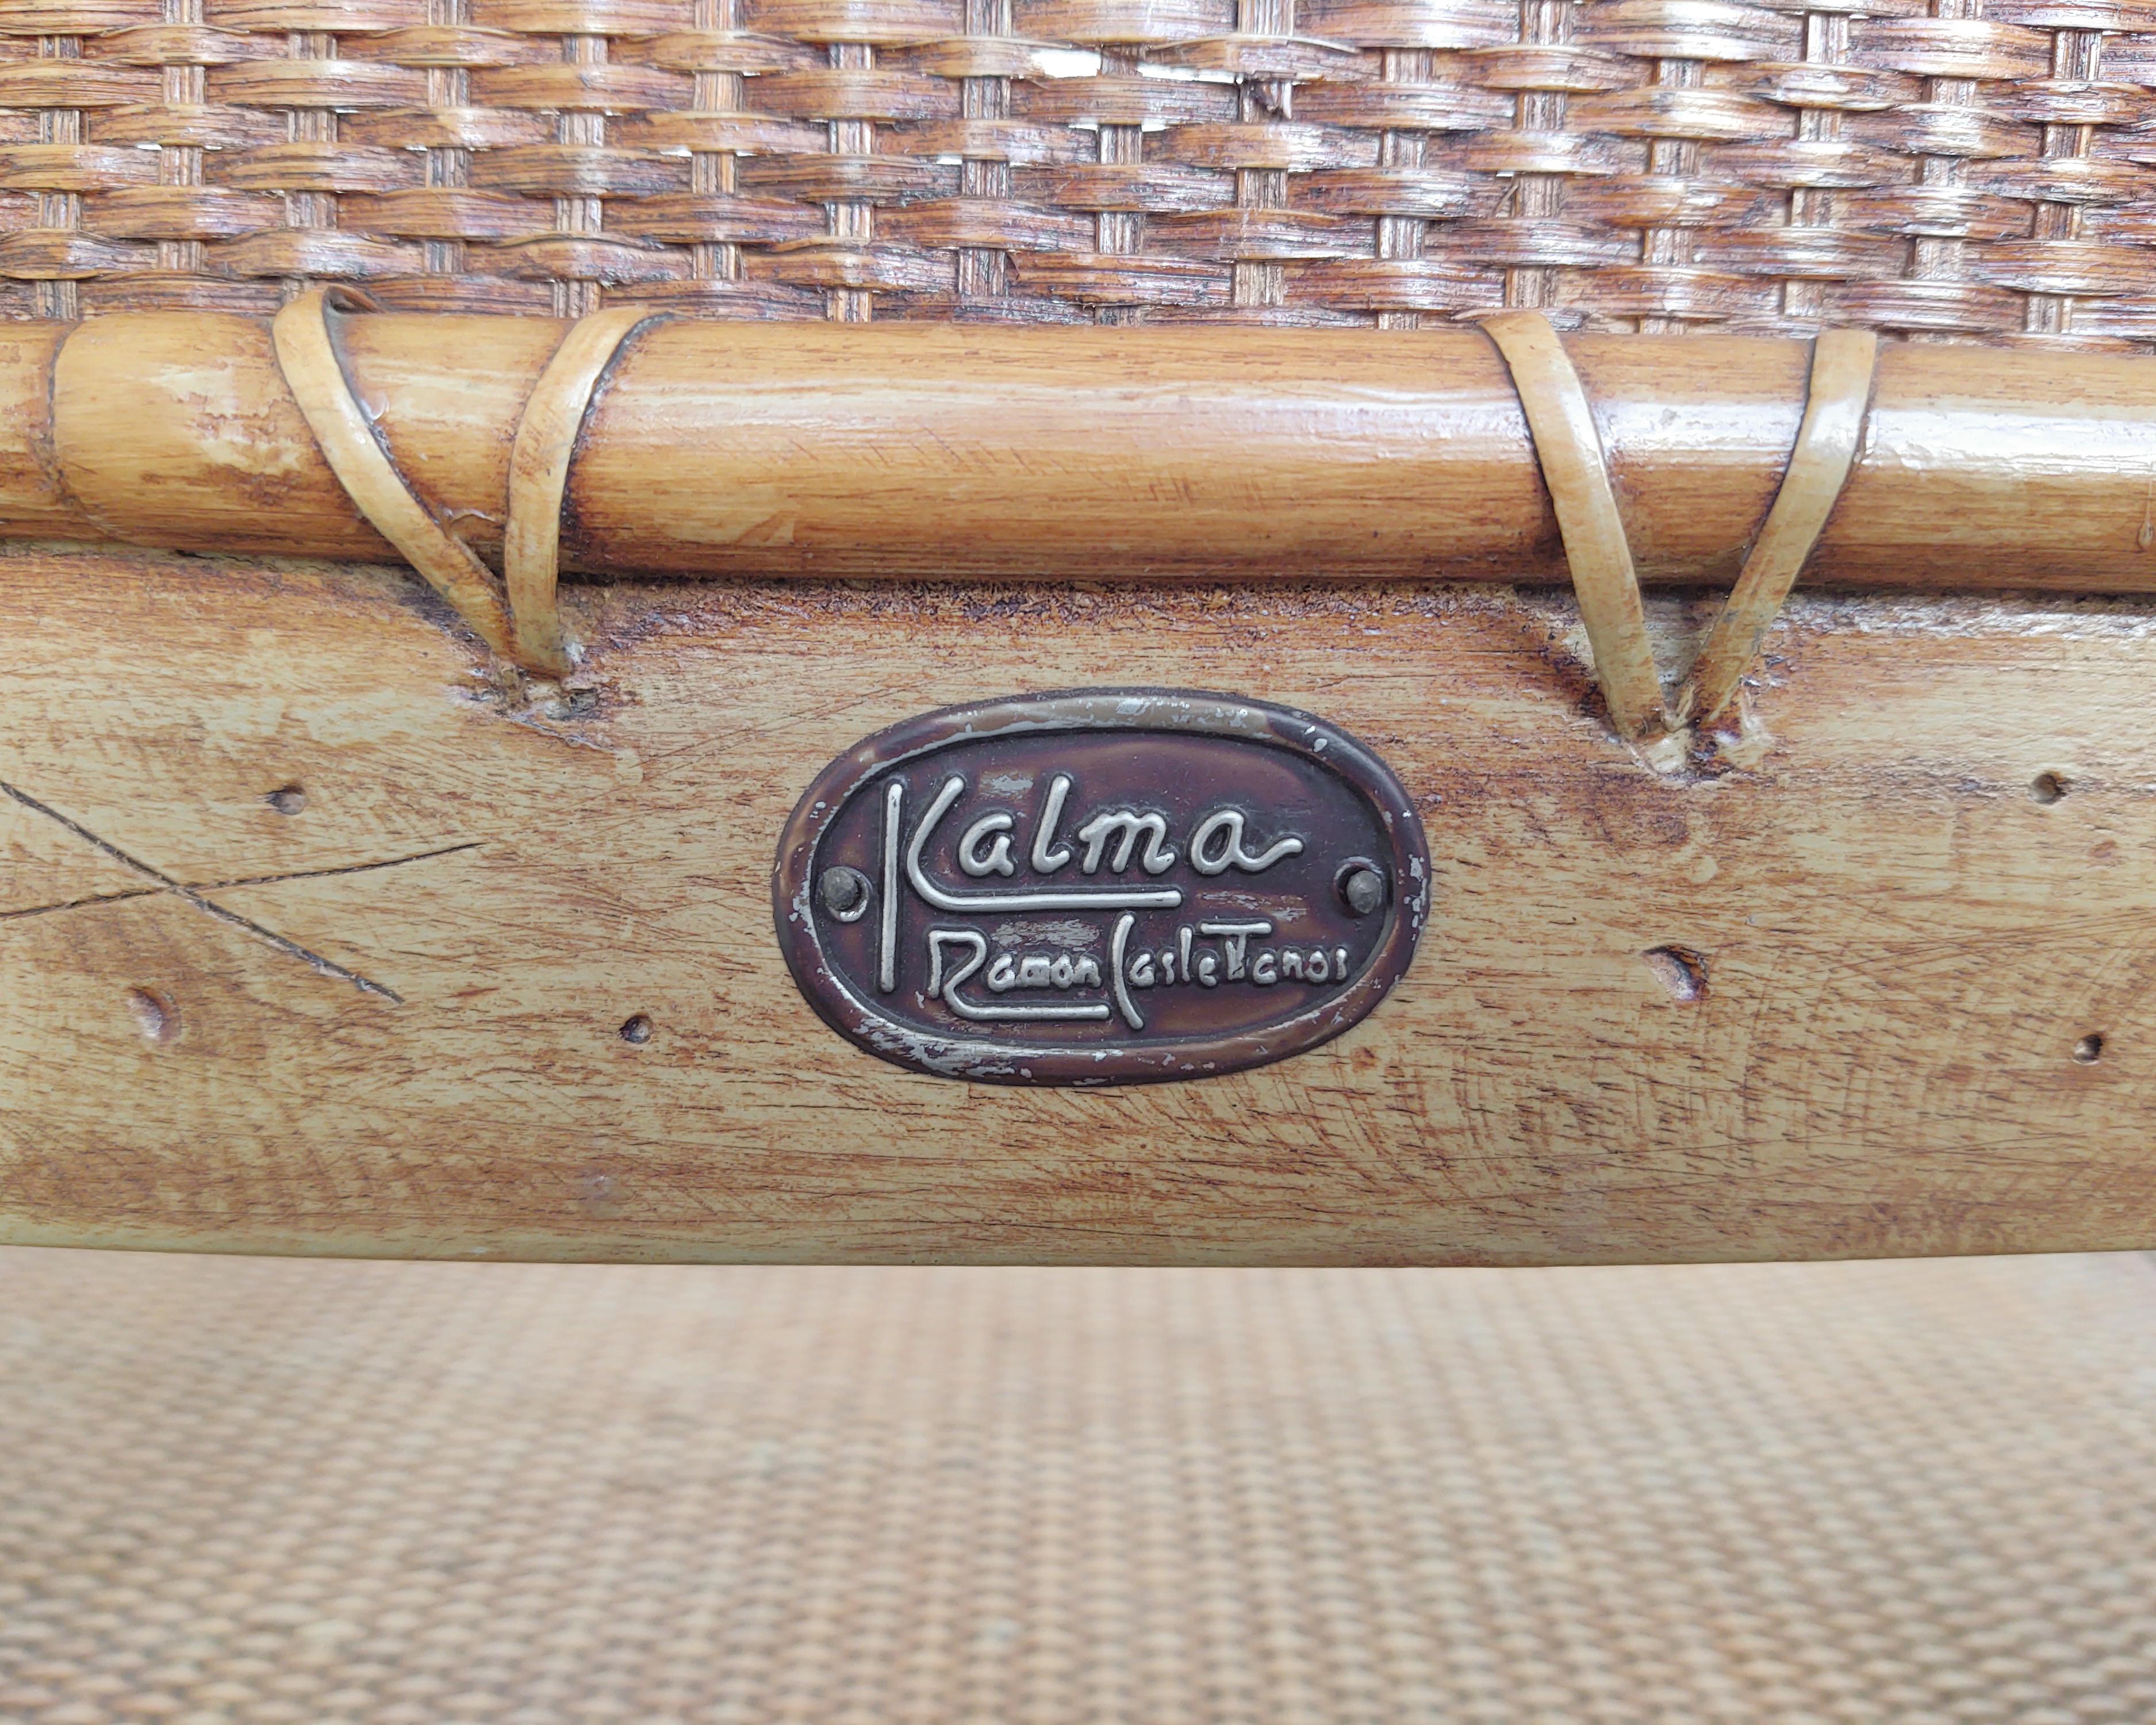 Late 20th Century Sculptural Rattan Arm Chair Designed by Ramon Castellano for Kalma Furniture